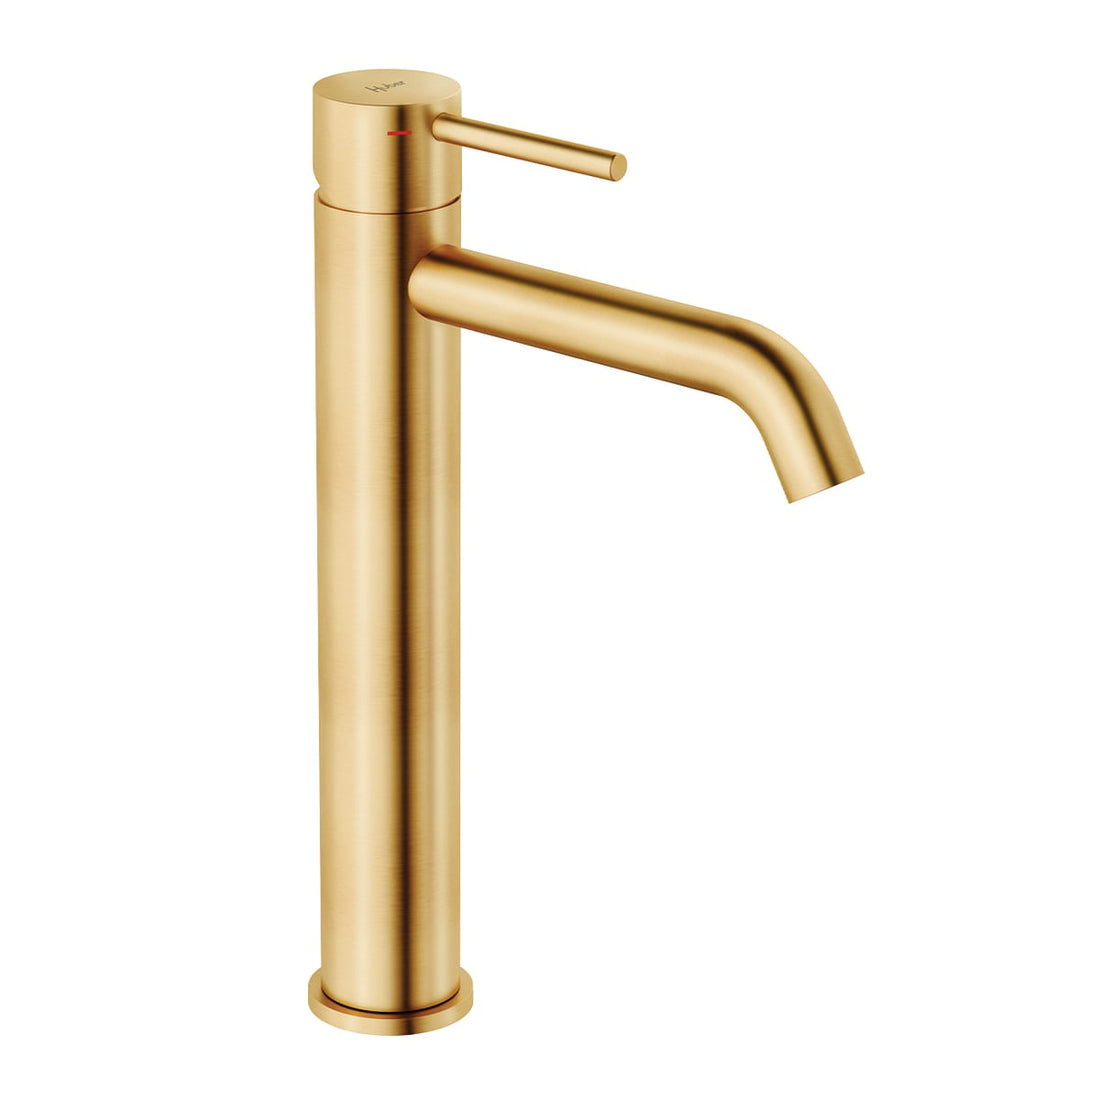 TAYRONA HIGH WASHBASIN MIXER WITHOUT WASTE BRUSHED GOLD - best price from Maltashopper.com BR430009072